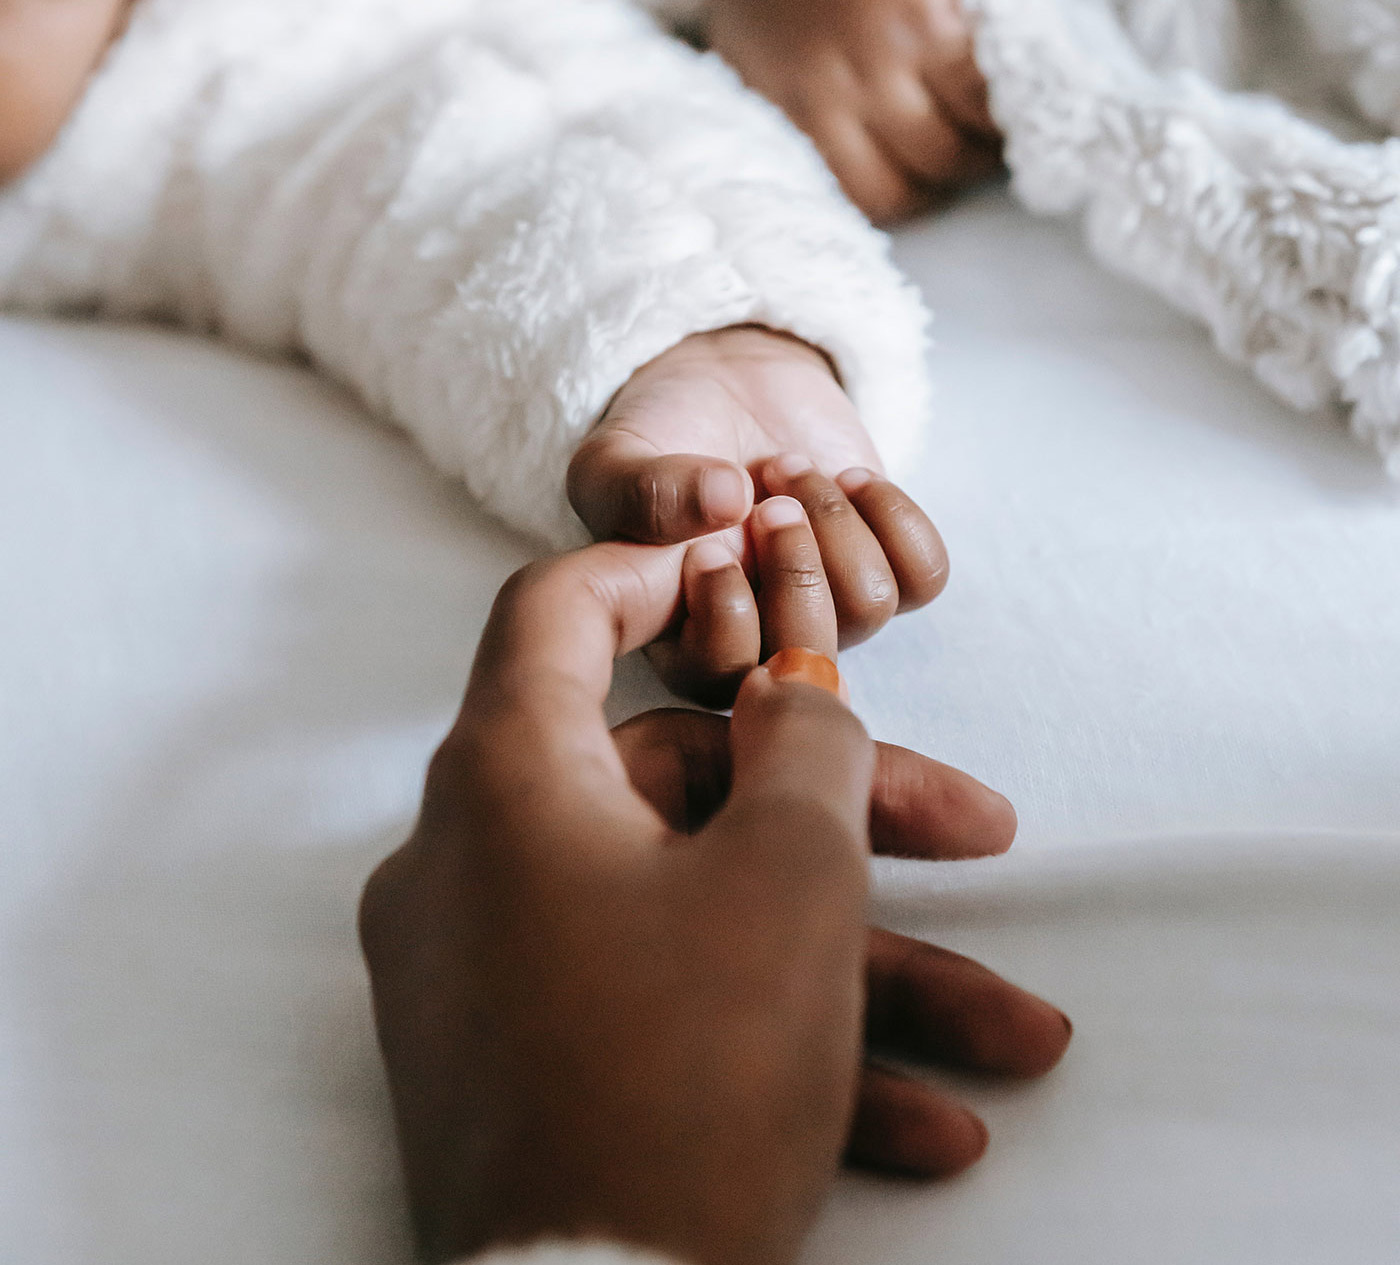 Mother holding hand of baby lying on bed.
